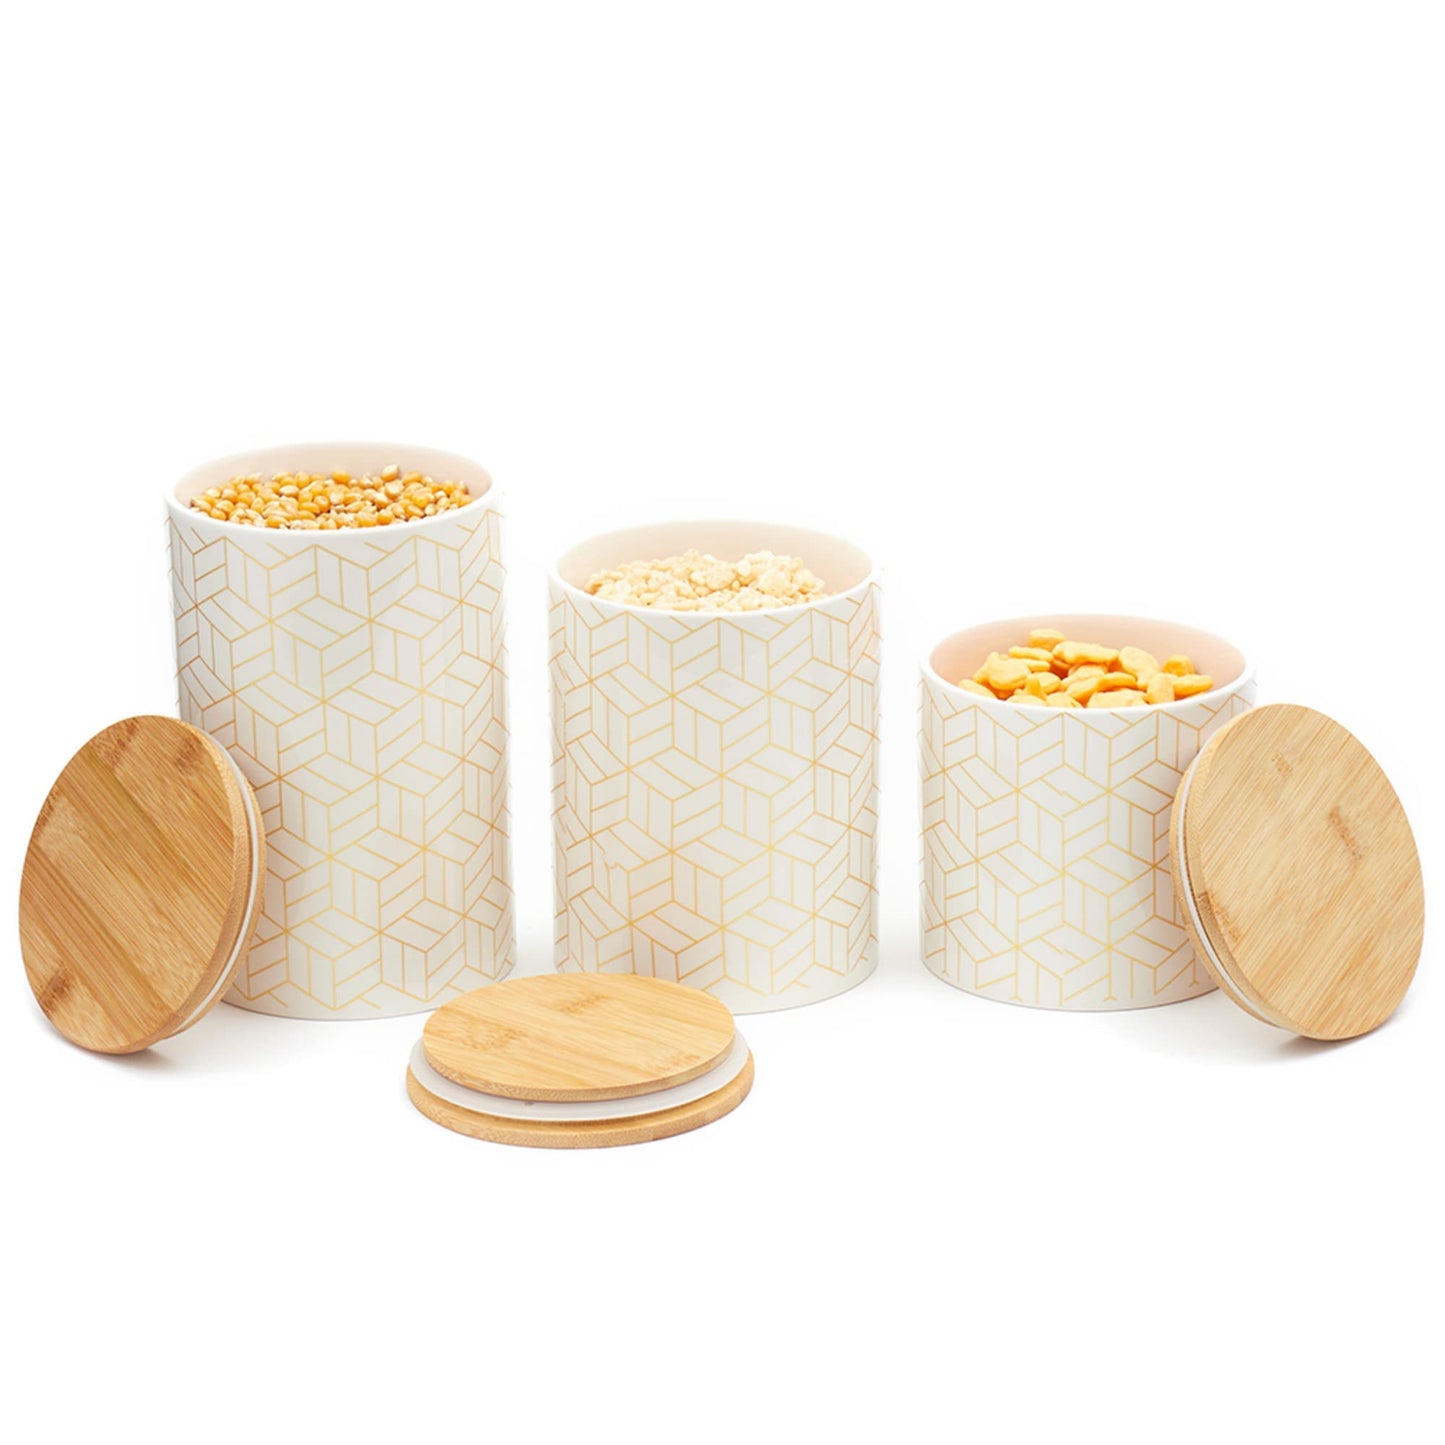 Cubix 3 Piece Ceramic Canister Set with Bamboo Top, White